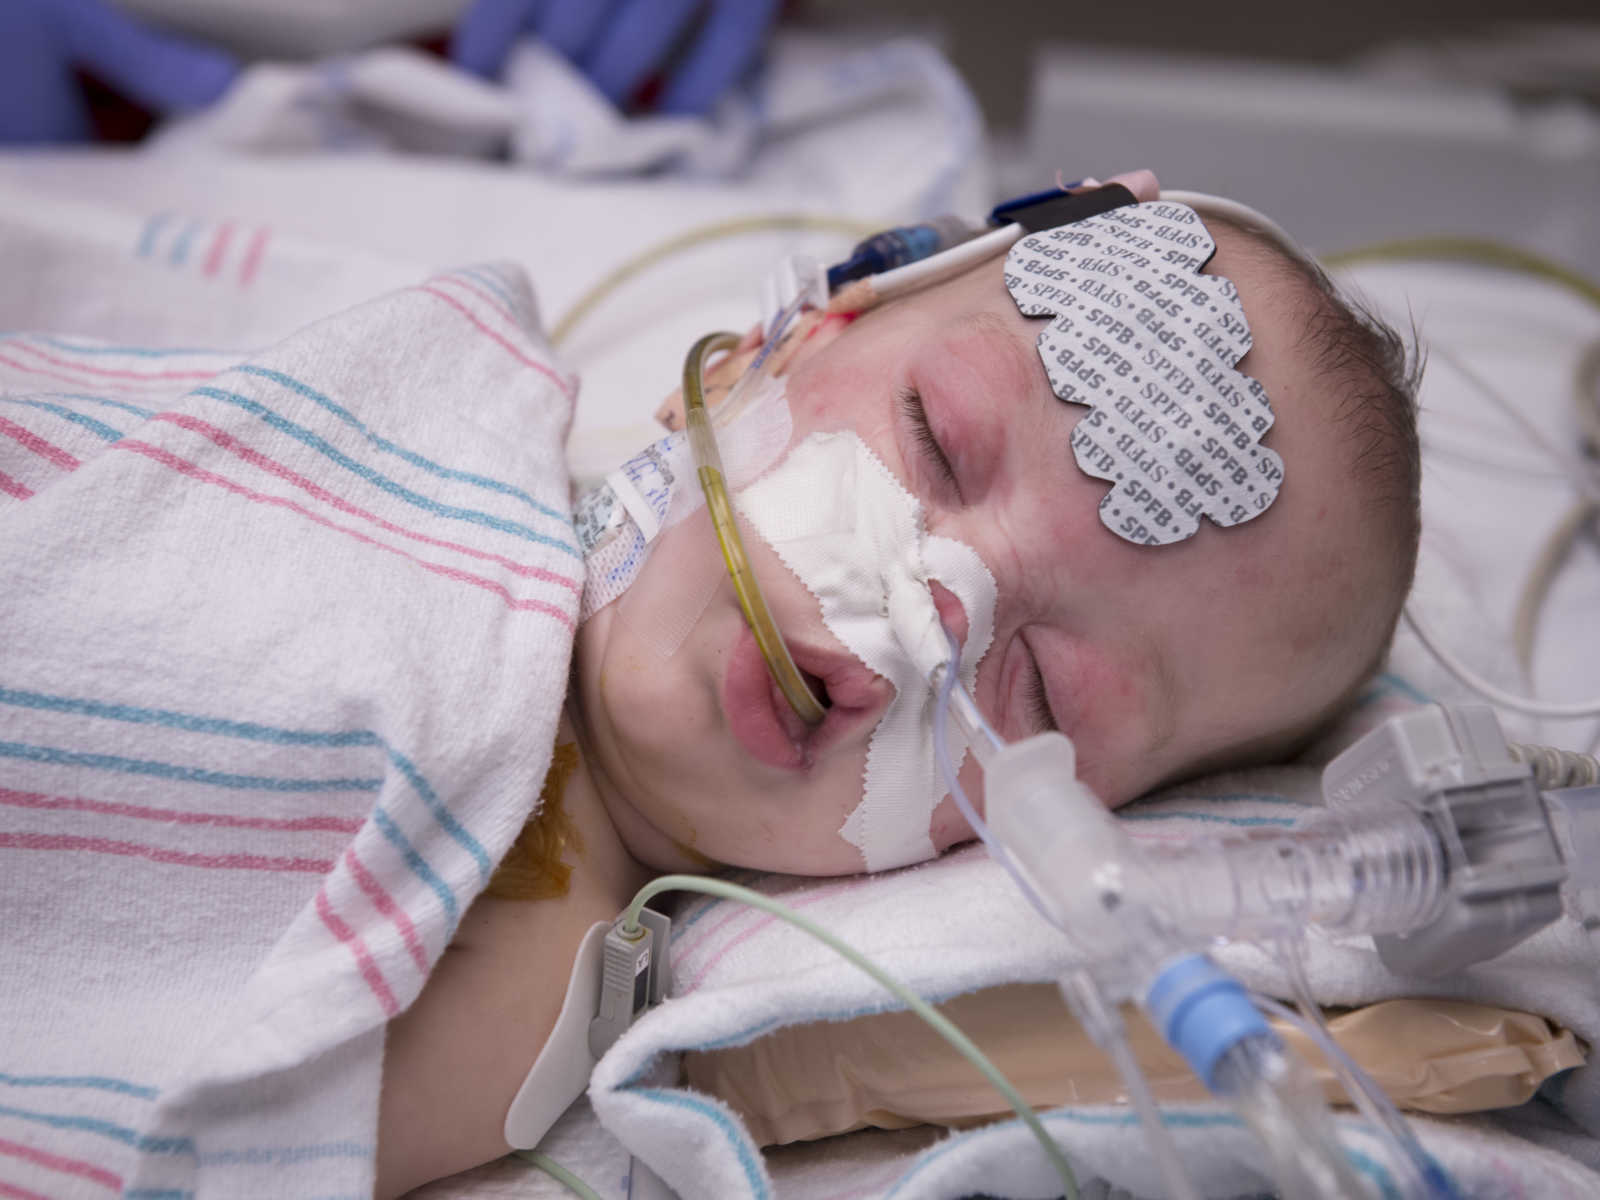 baby after surgery wrapped in pink and blue striped blanket sleeping with patch on forehead and wires in nose and mouth